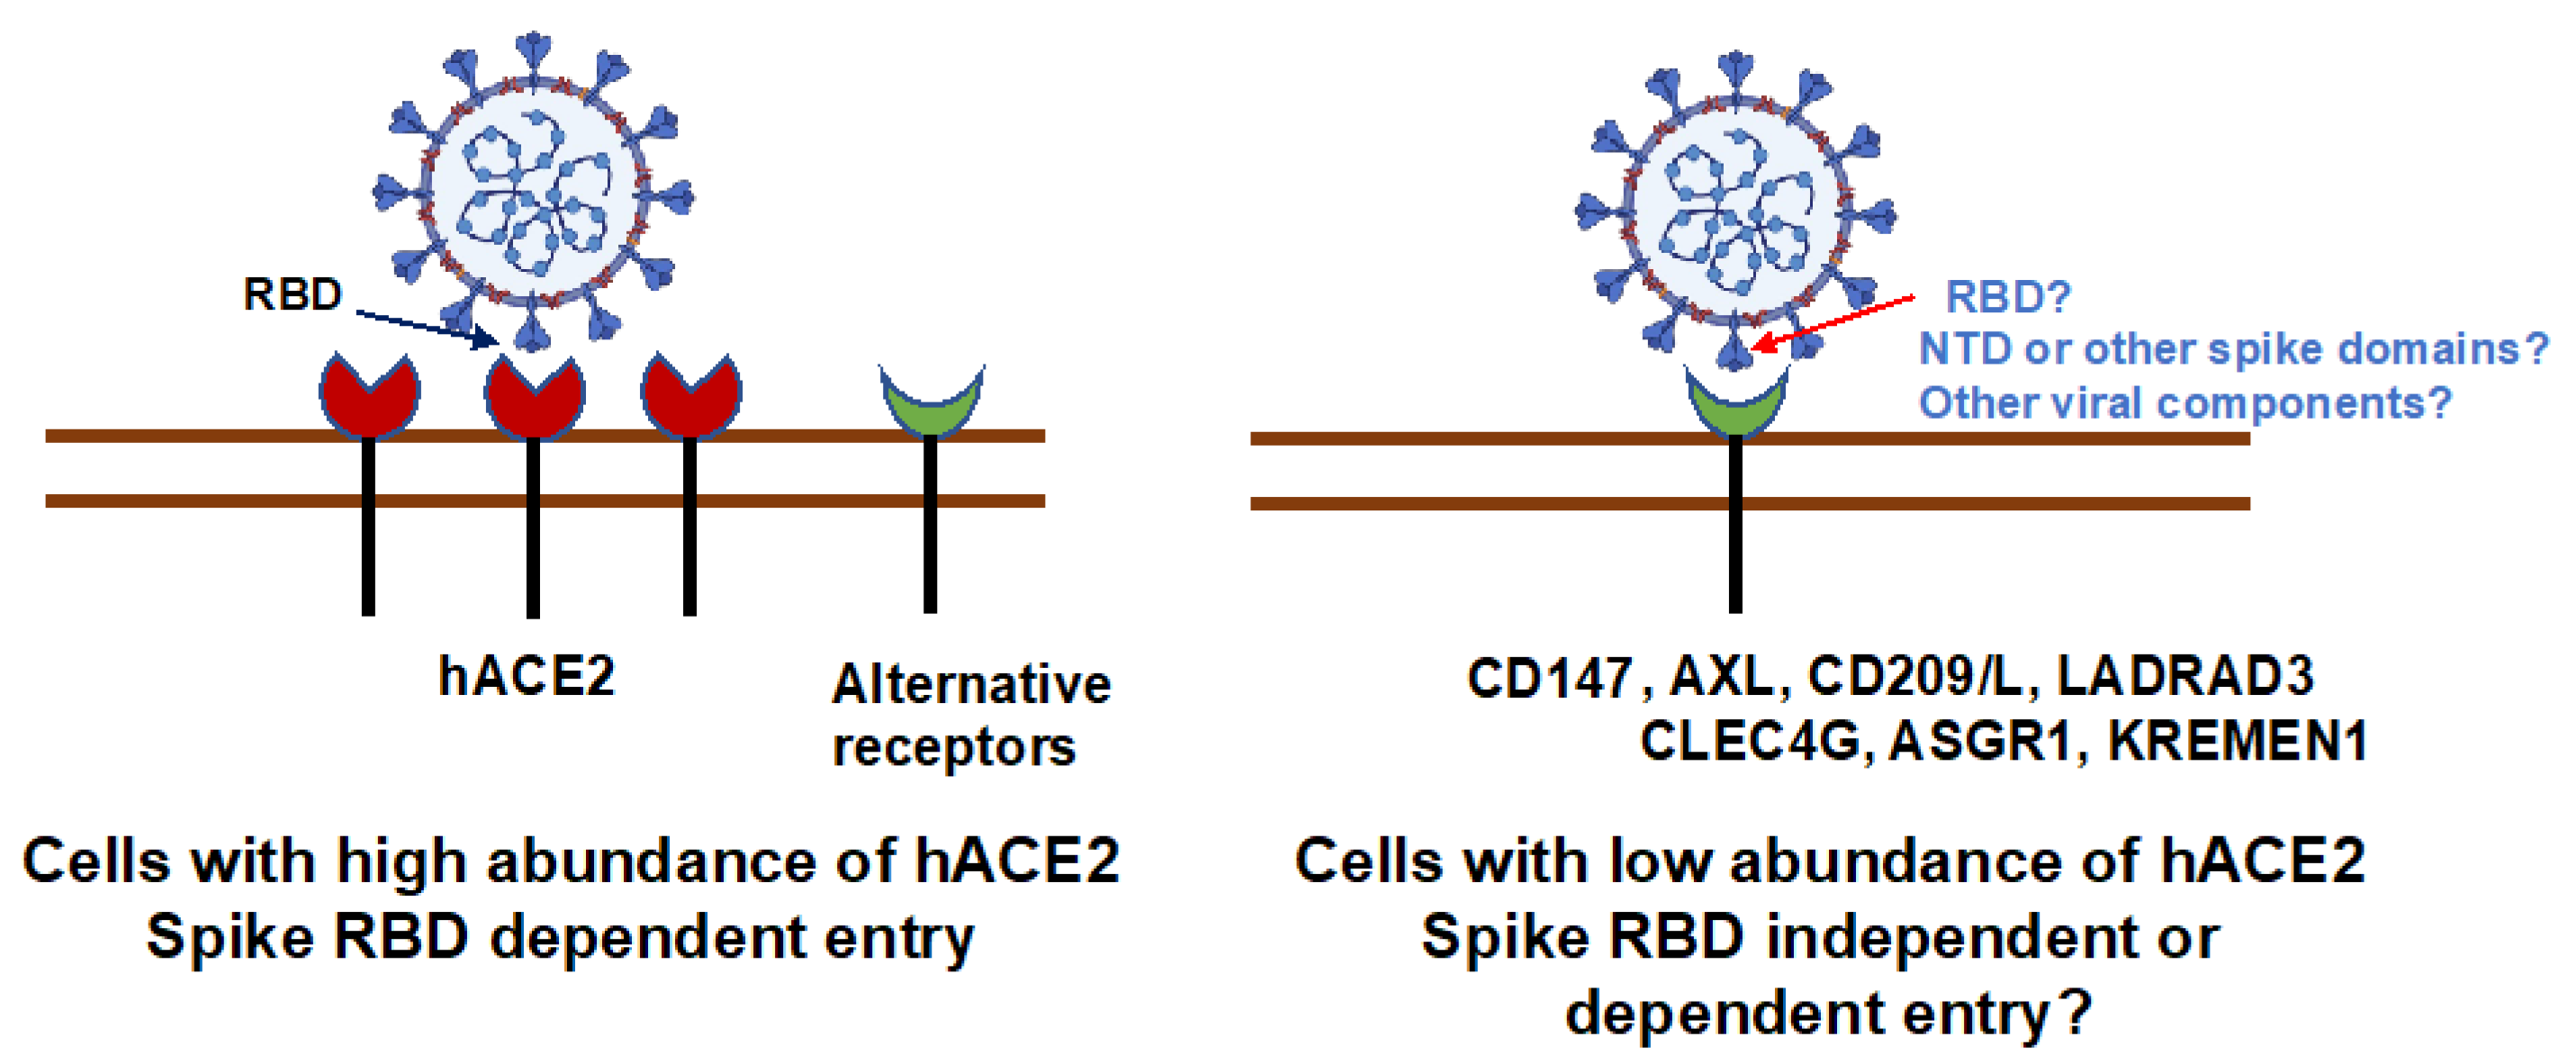 CD209L/L-SIGN and CD209/DC-SIGN Act as Receptors for SARS-CoV-2